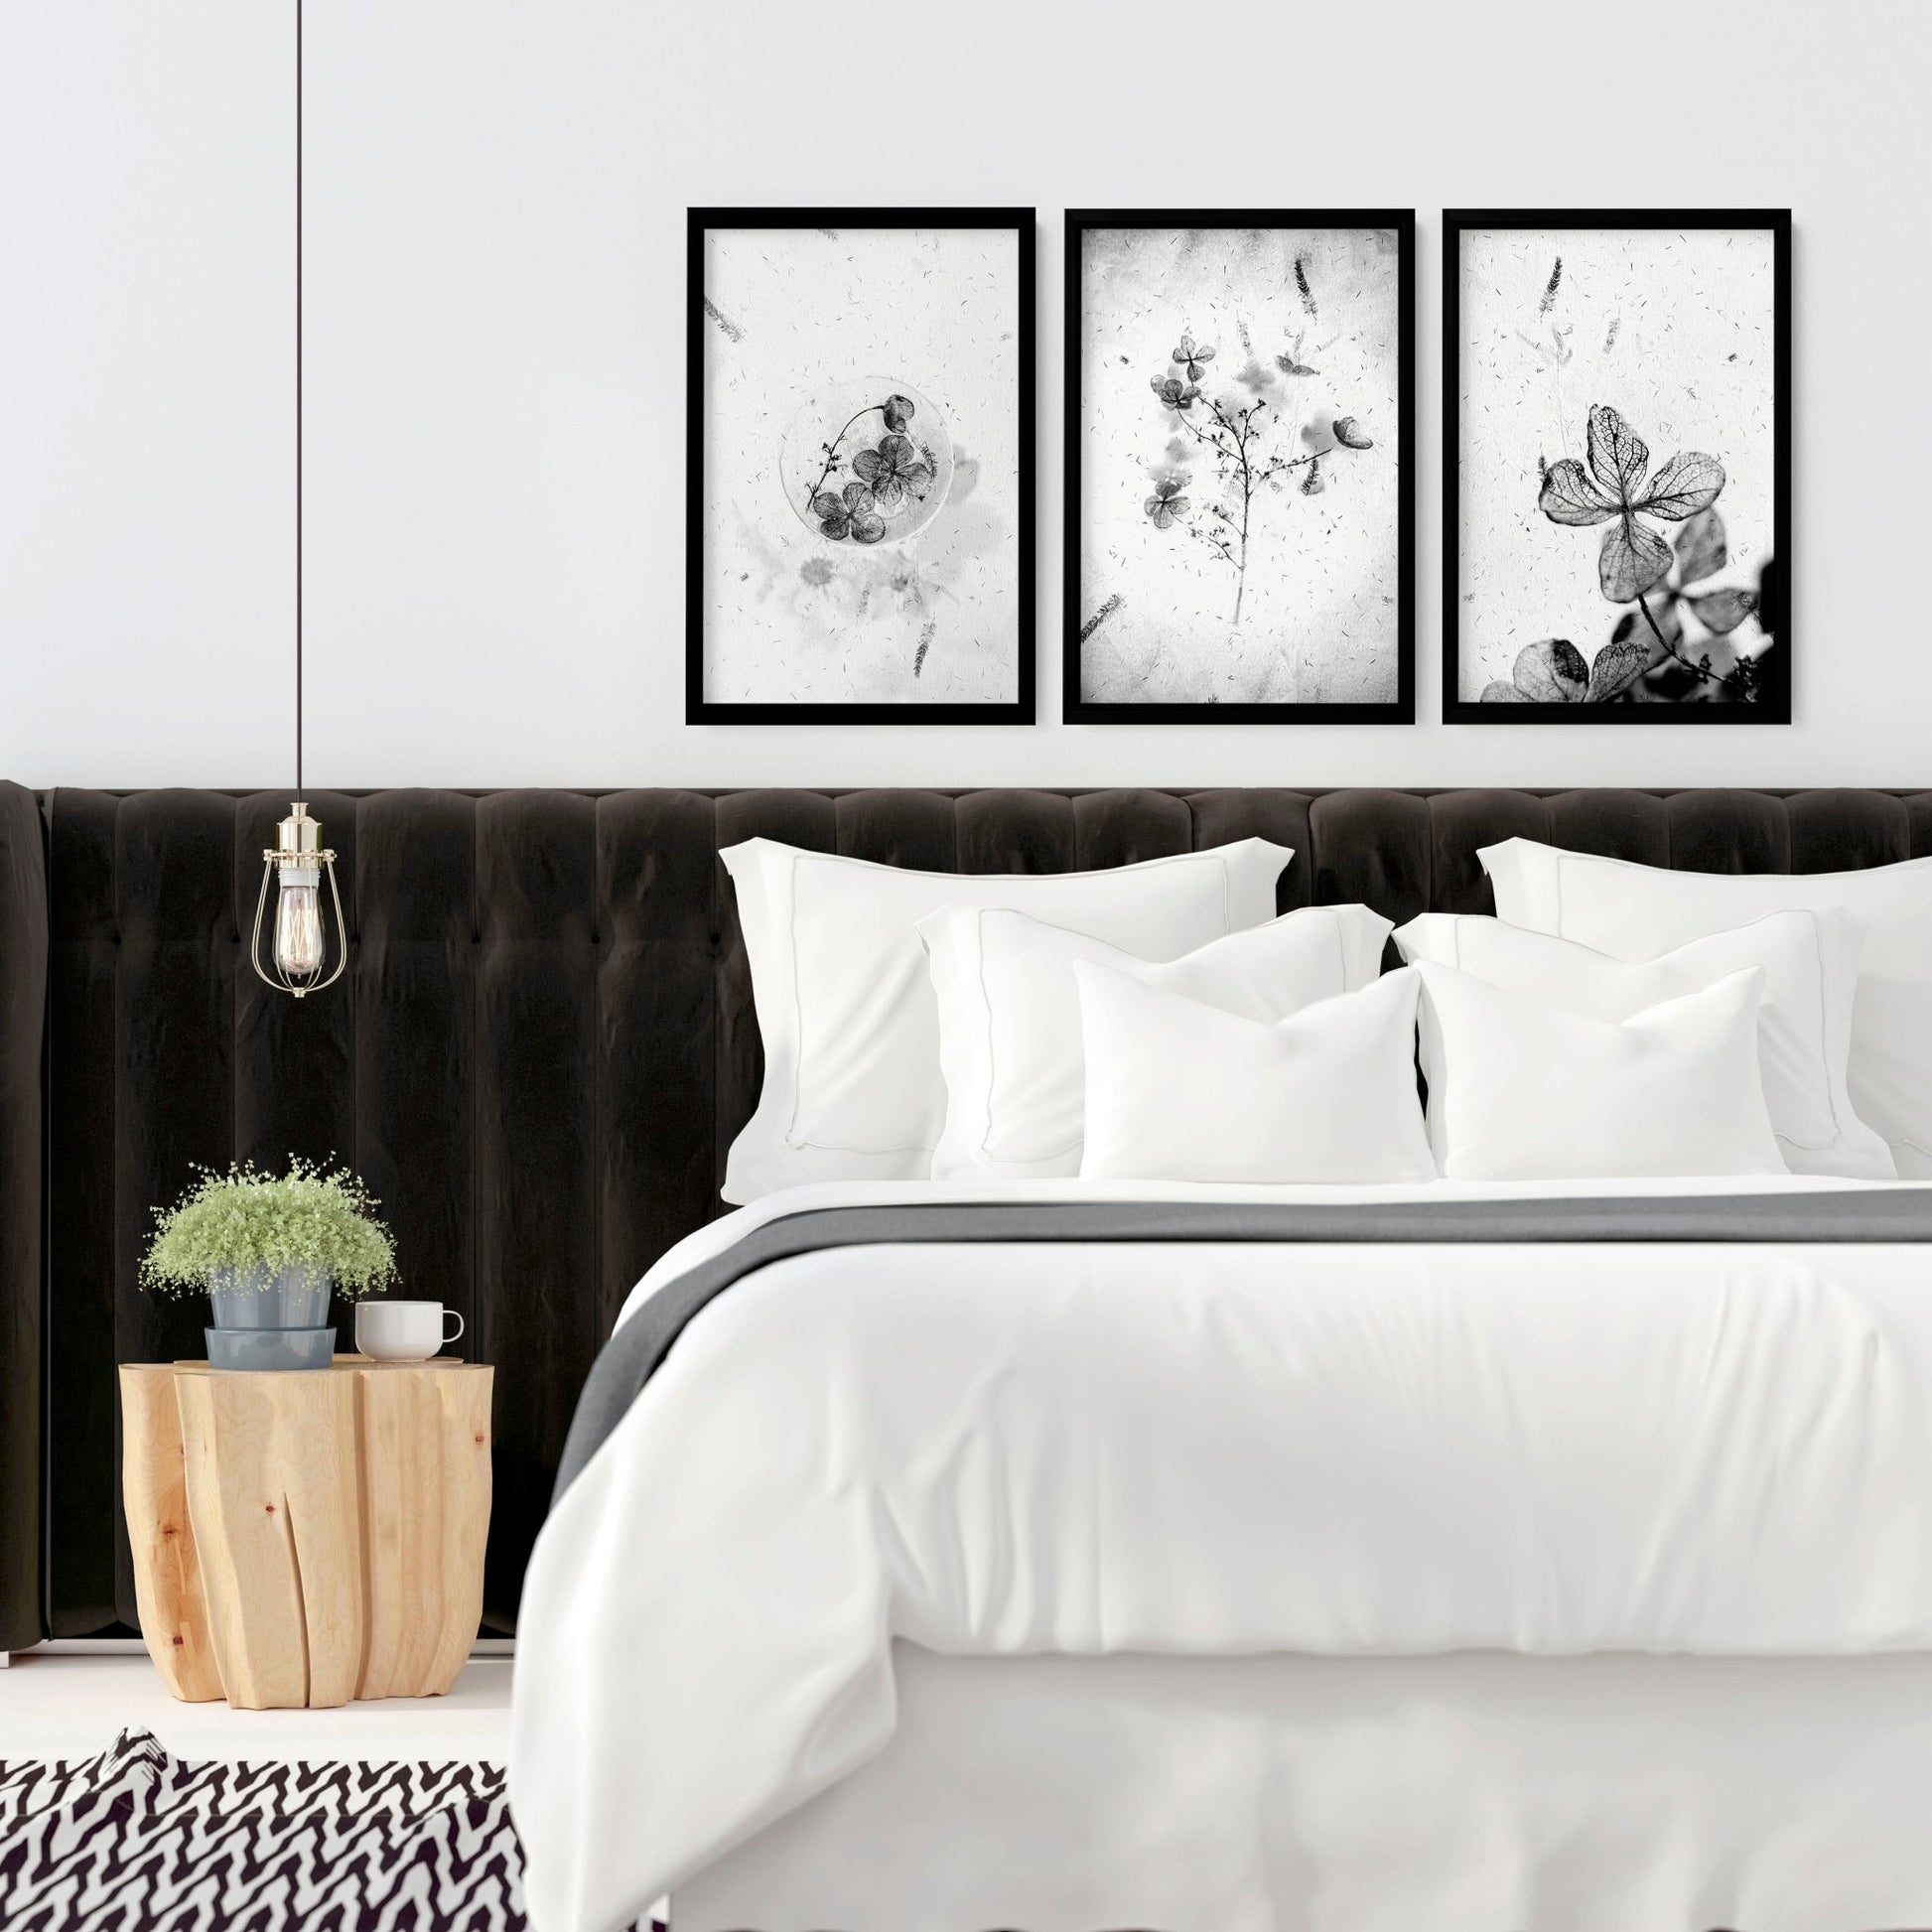 Art for a bedroom | set of 3 wall prints - About Wall Art